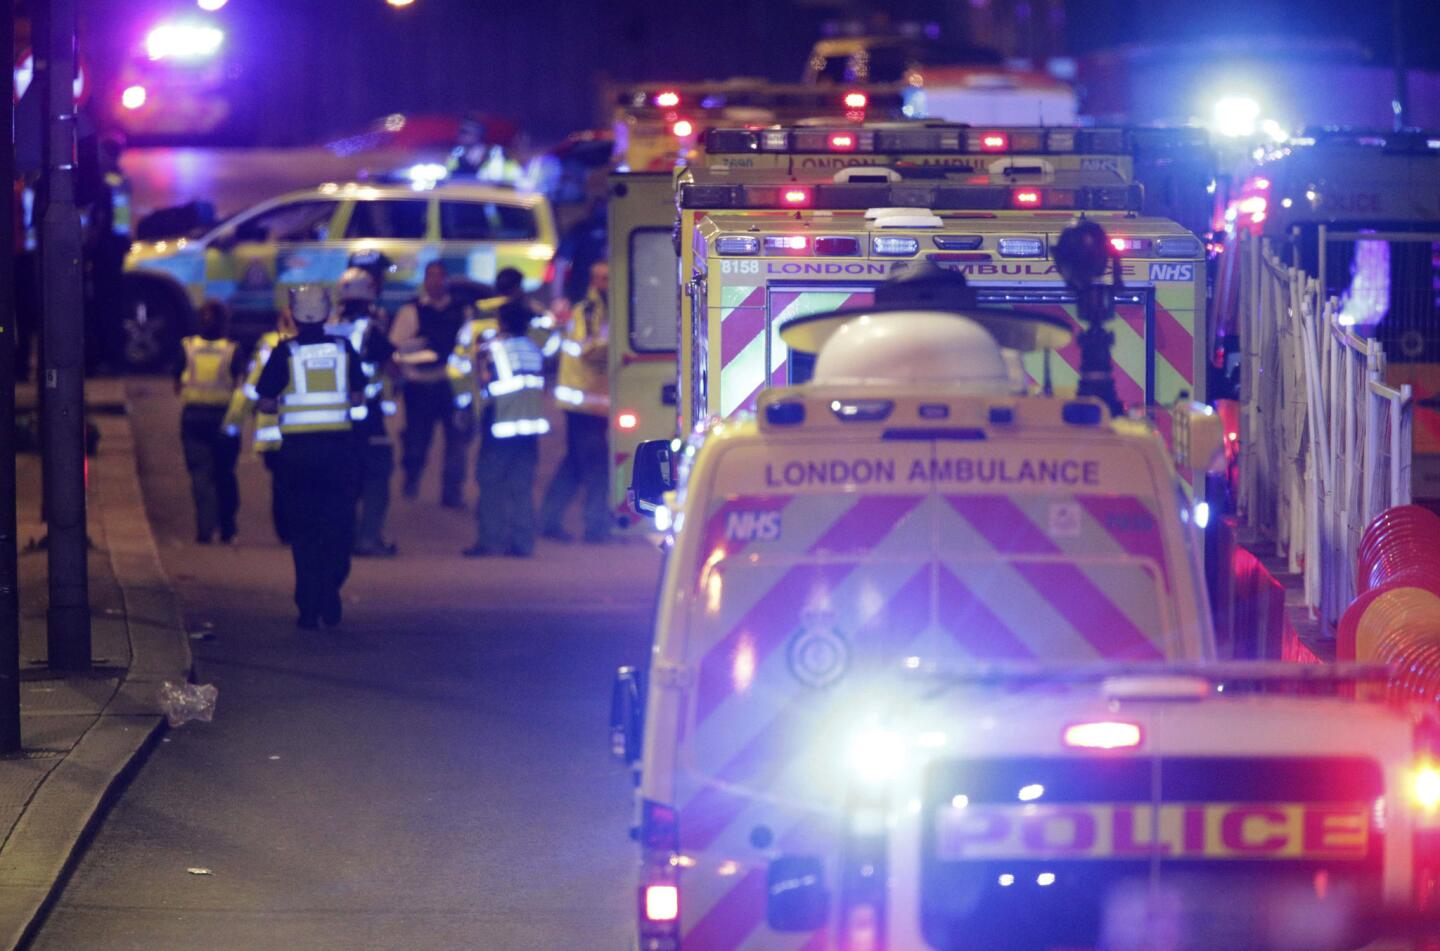 Emergency crews tend to the injured on London Bridge after the attack.